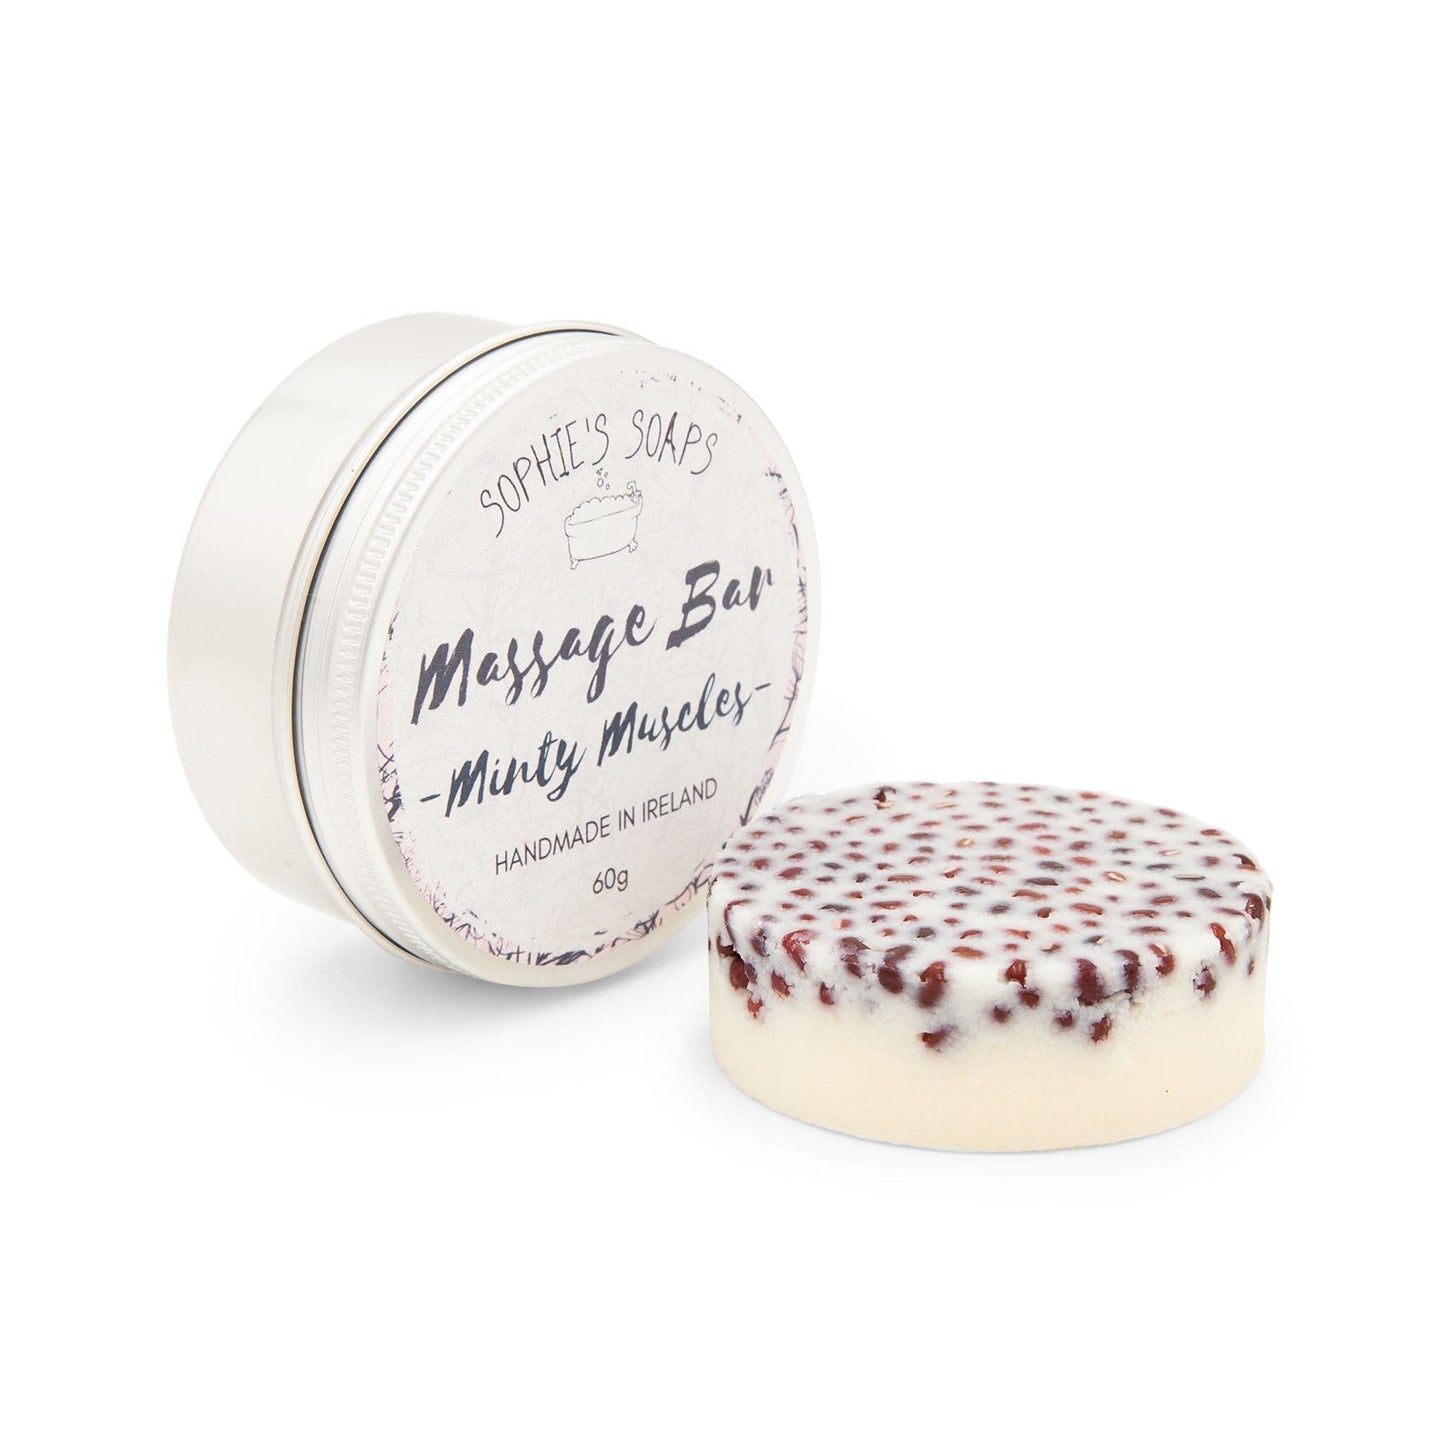 Sophie's Soaps Massage Oil Minty Muscles Solid Massage Bar with Aduki Beans - Sophie's Soaps